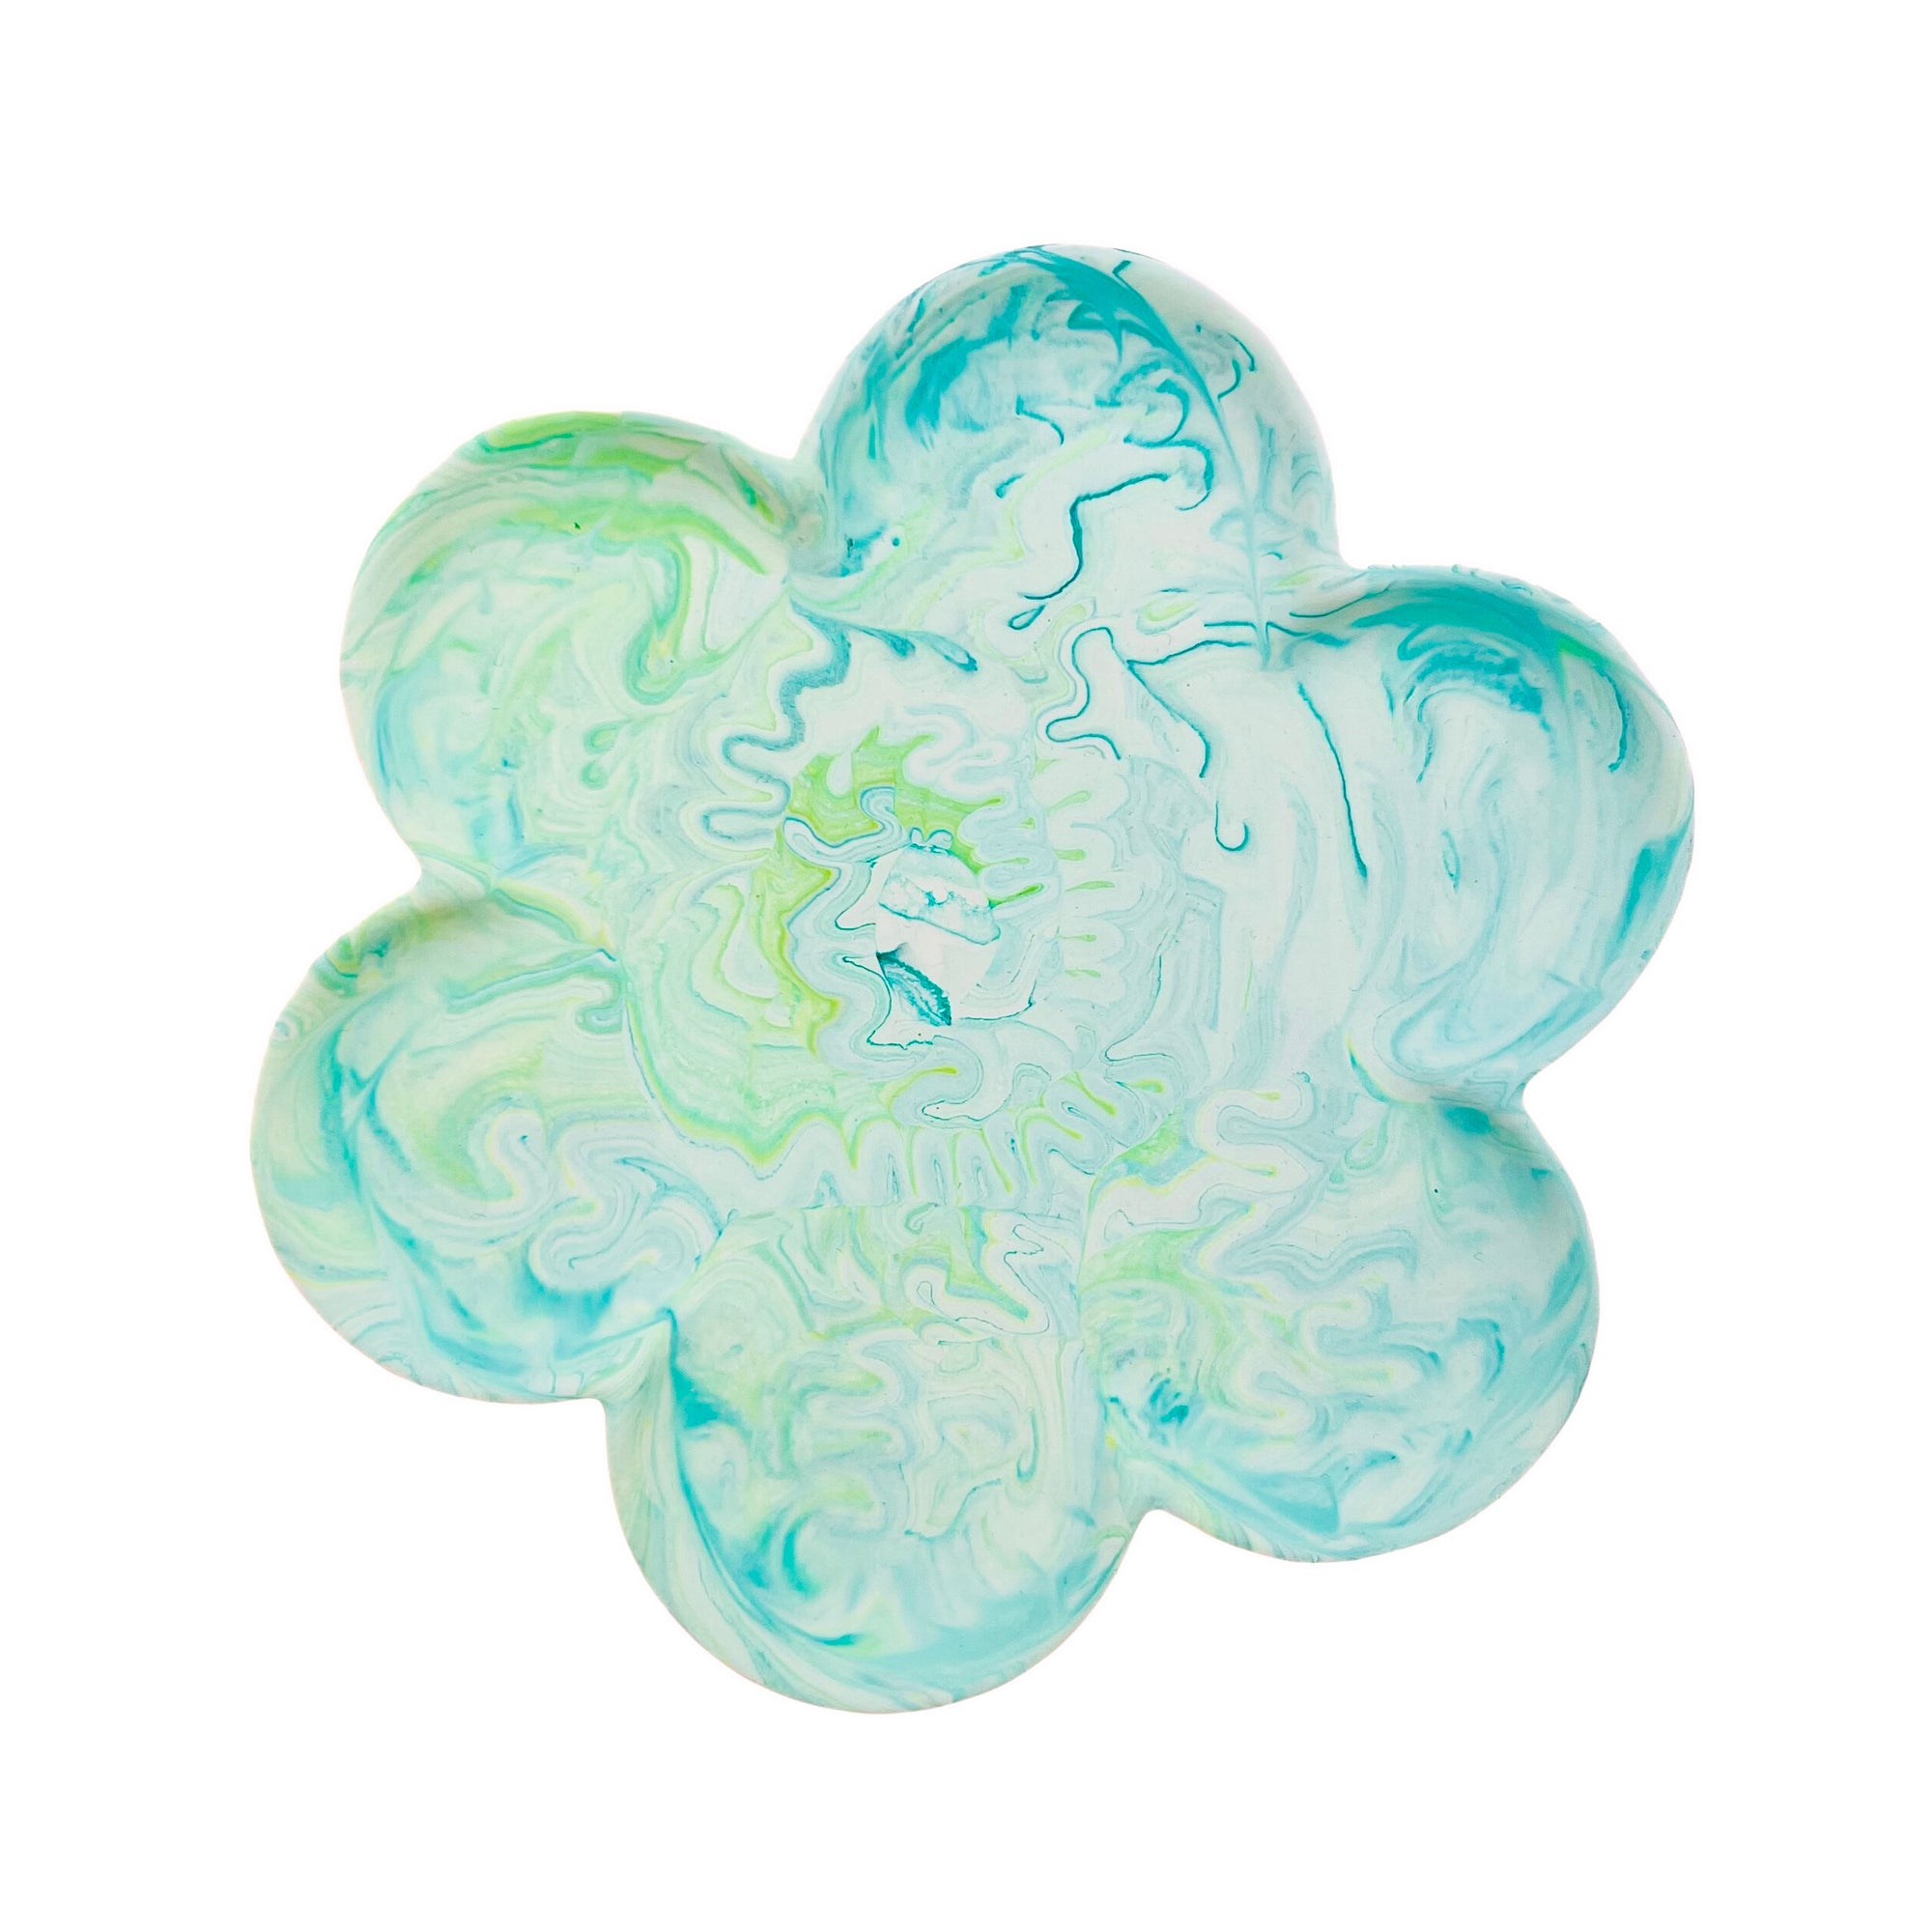 A Jesmonite dish shaped like a daisy measuring 14.50cm in diameter marbled with turquoise and lime pigment.